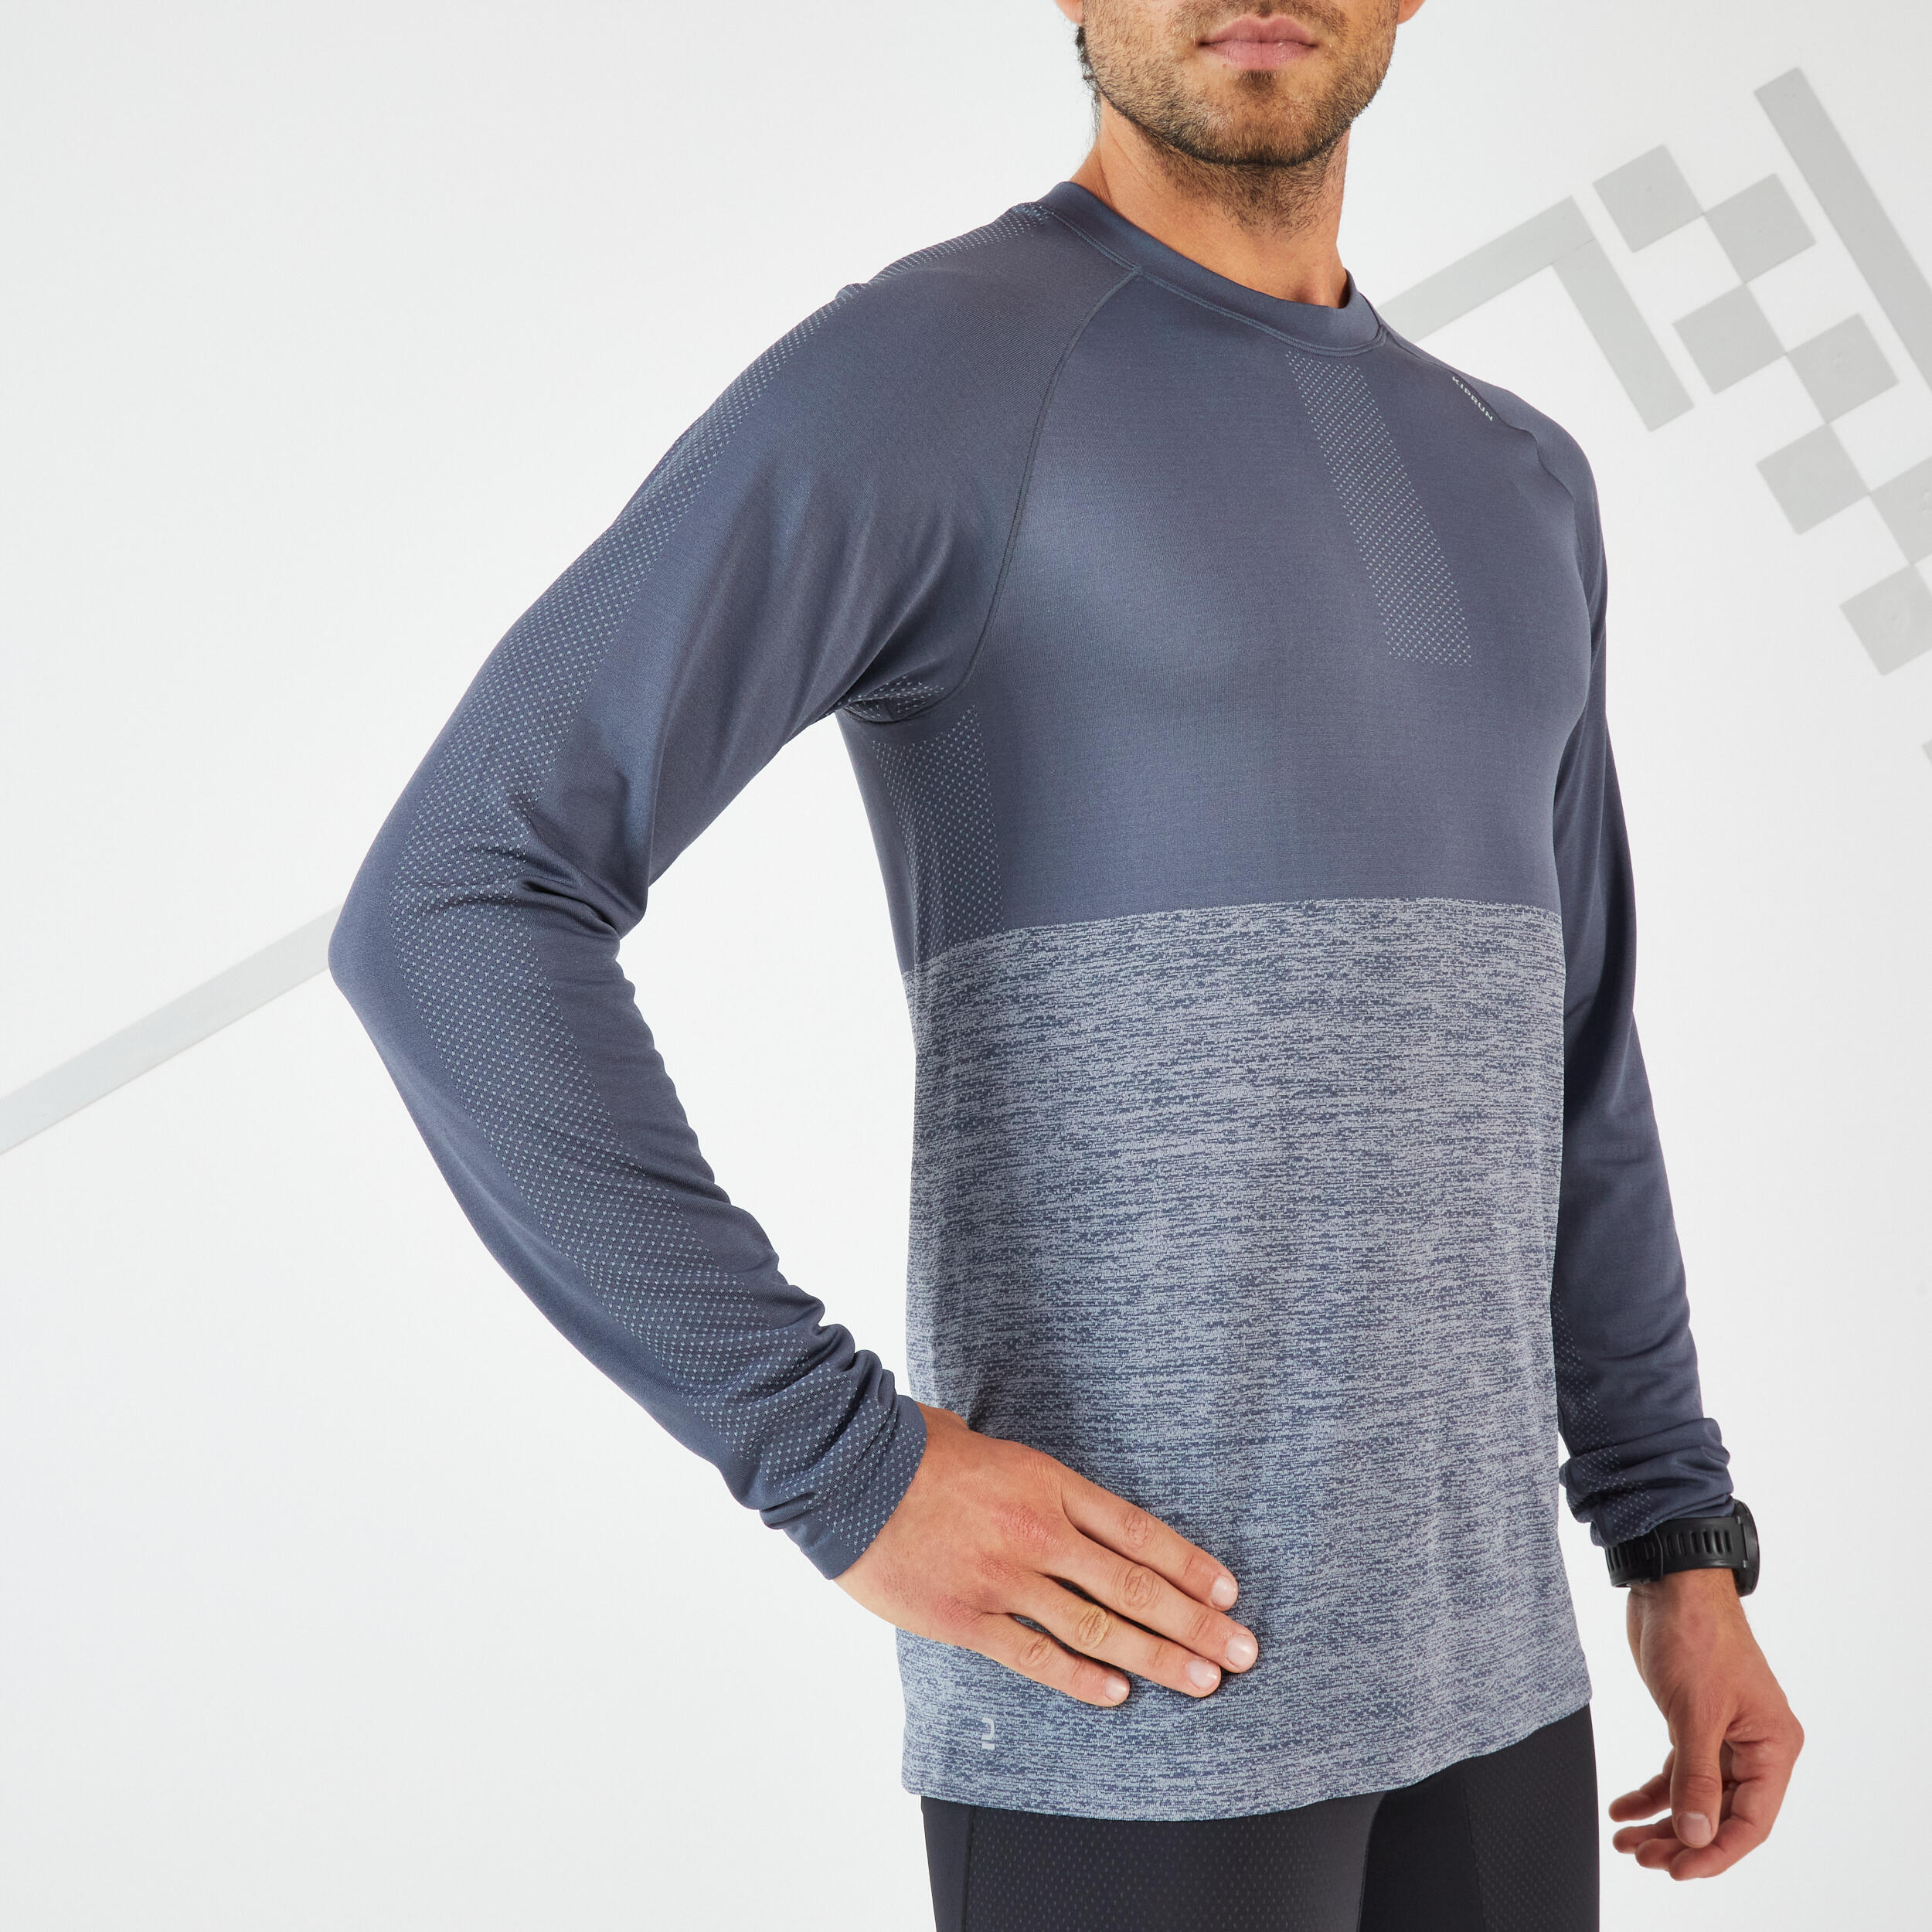 KIPRUN CARE MEN'S BREATHABLE LONG-SLEEVED RUNNING T-SHIRT - GREY LIMITED EDITION 6/9